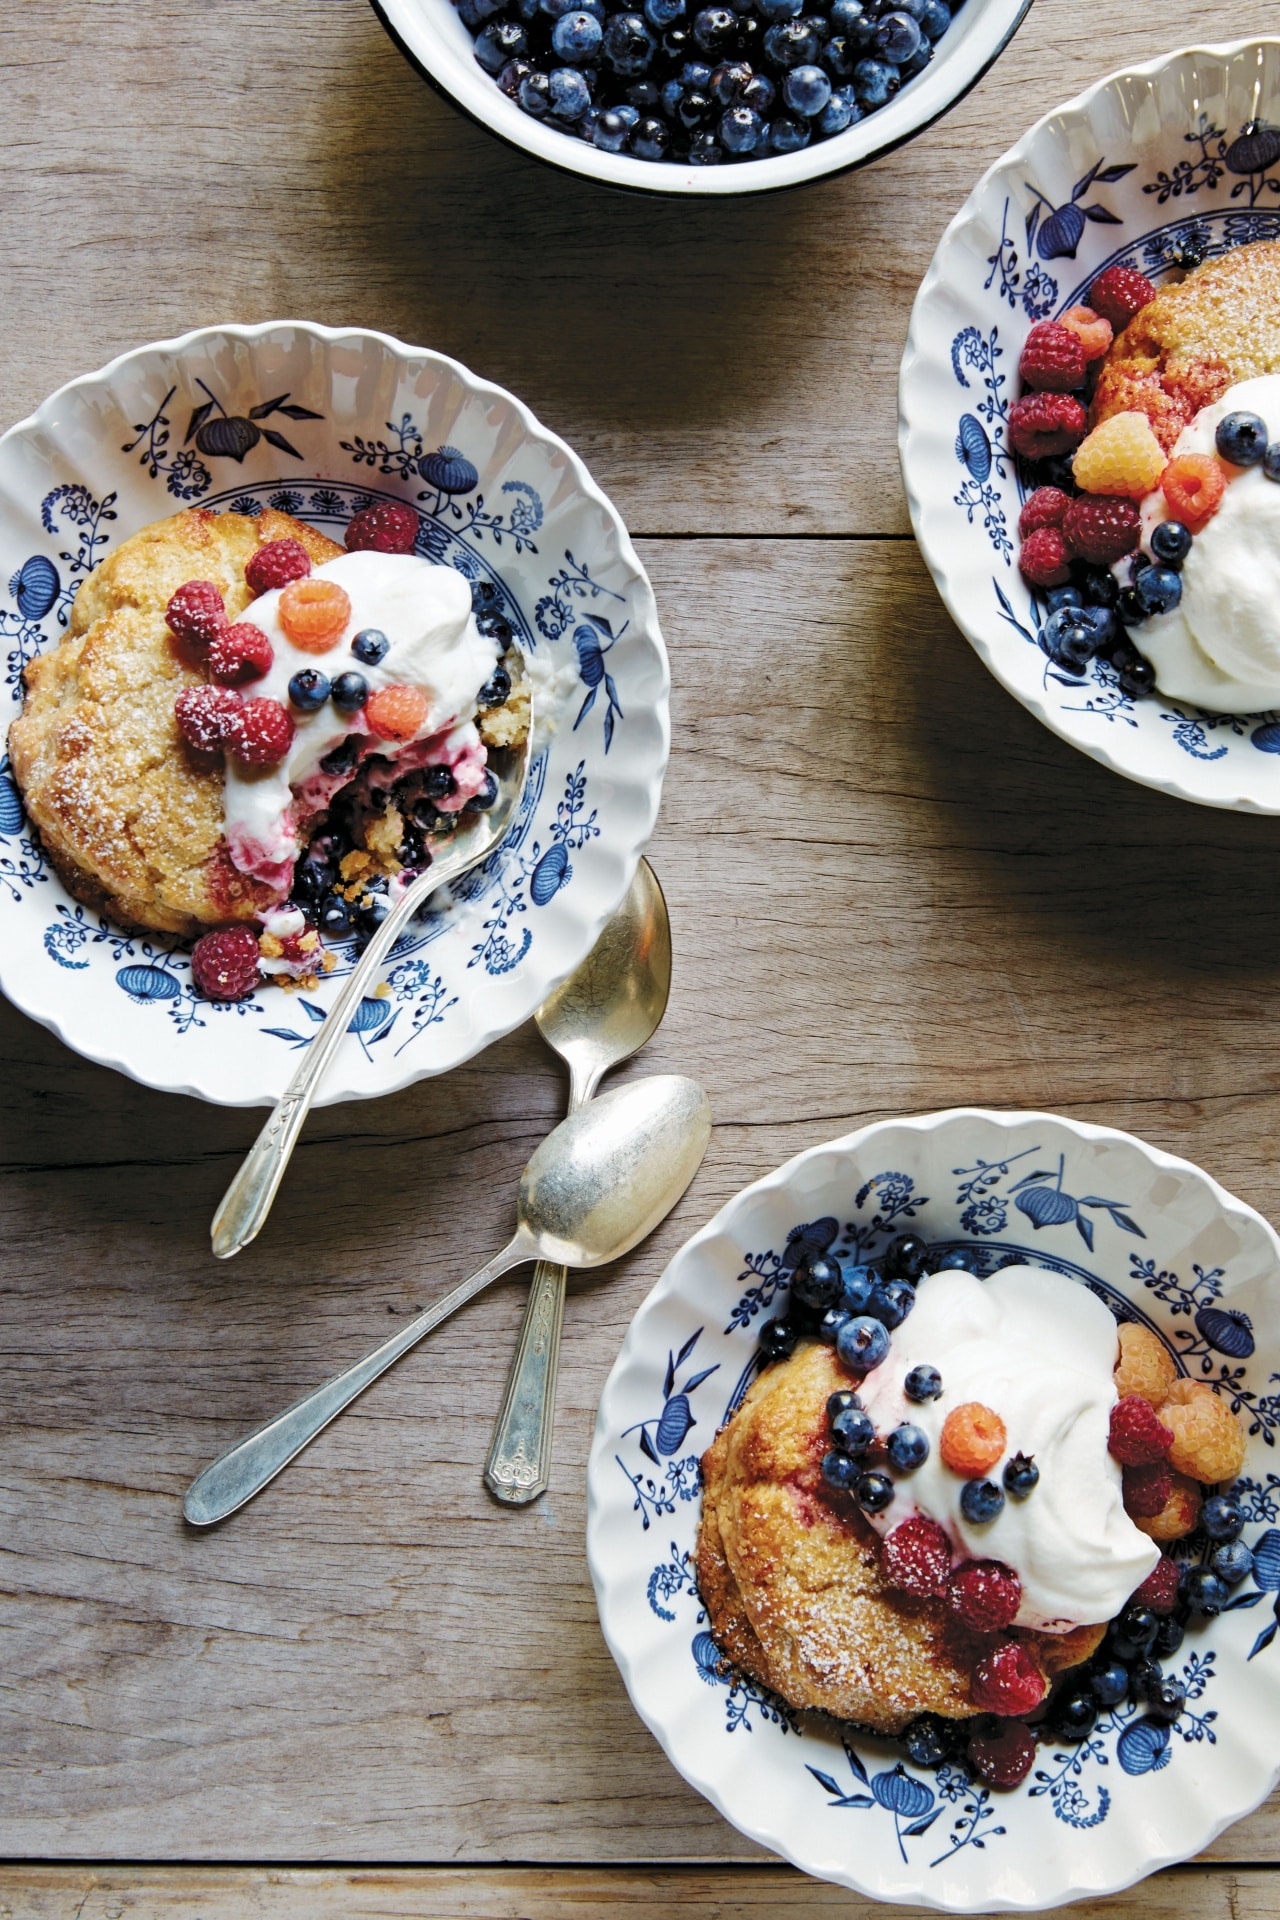 Erin French's Summer Berries with Ginger-Cream Shortcakes